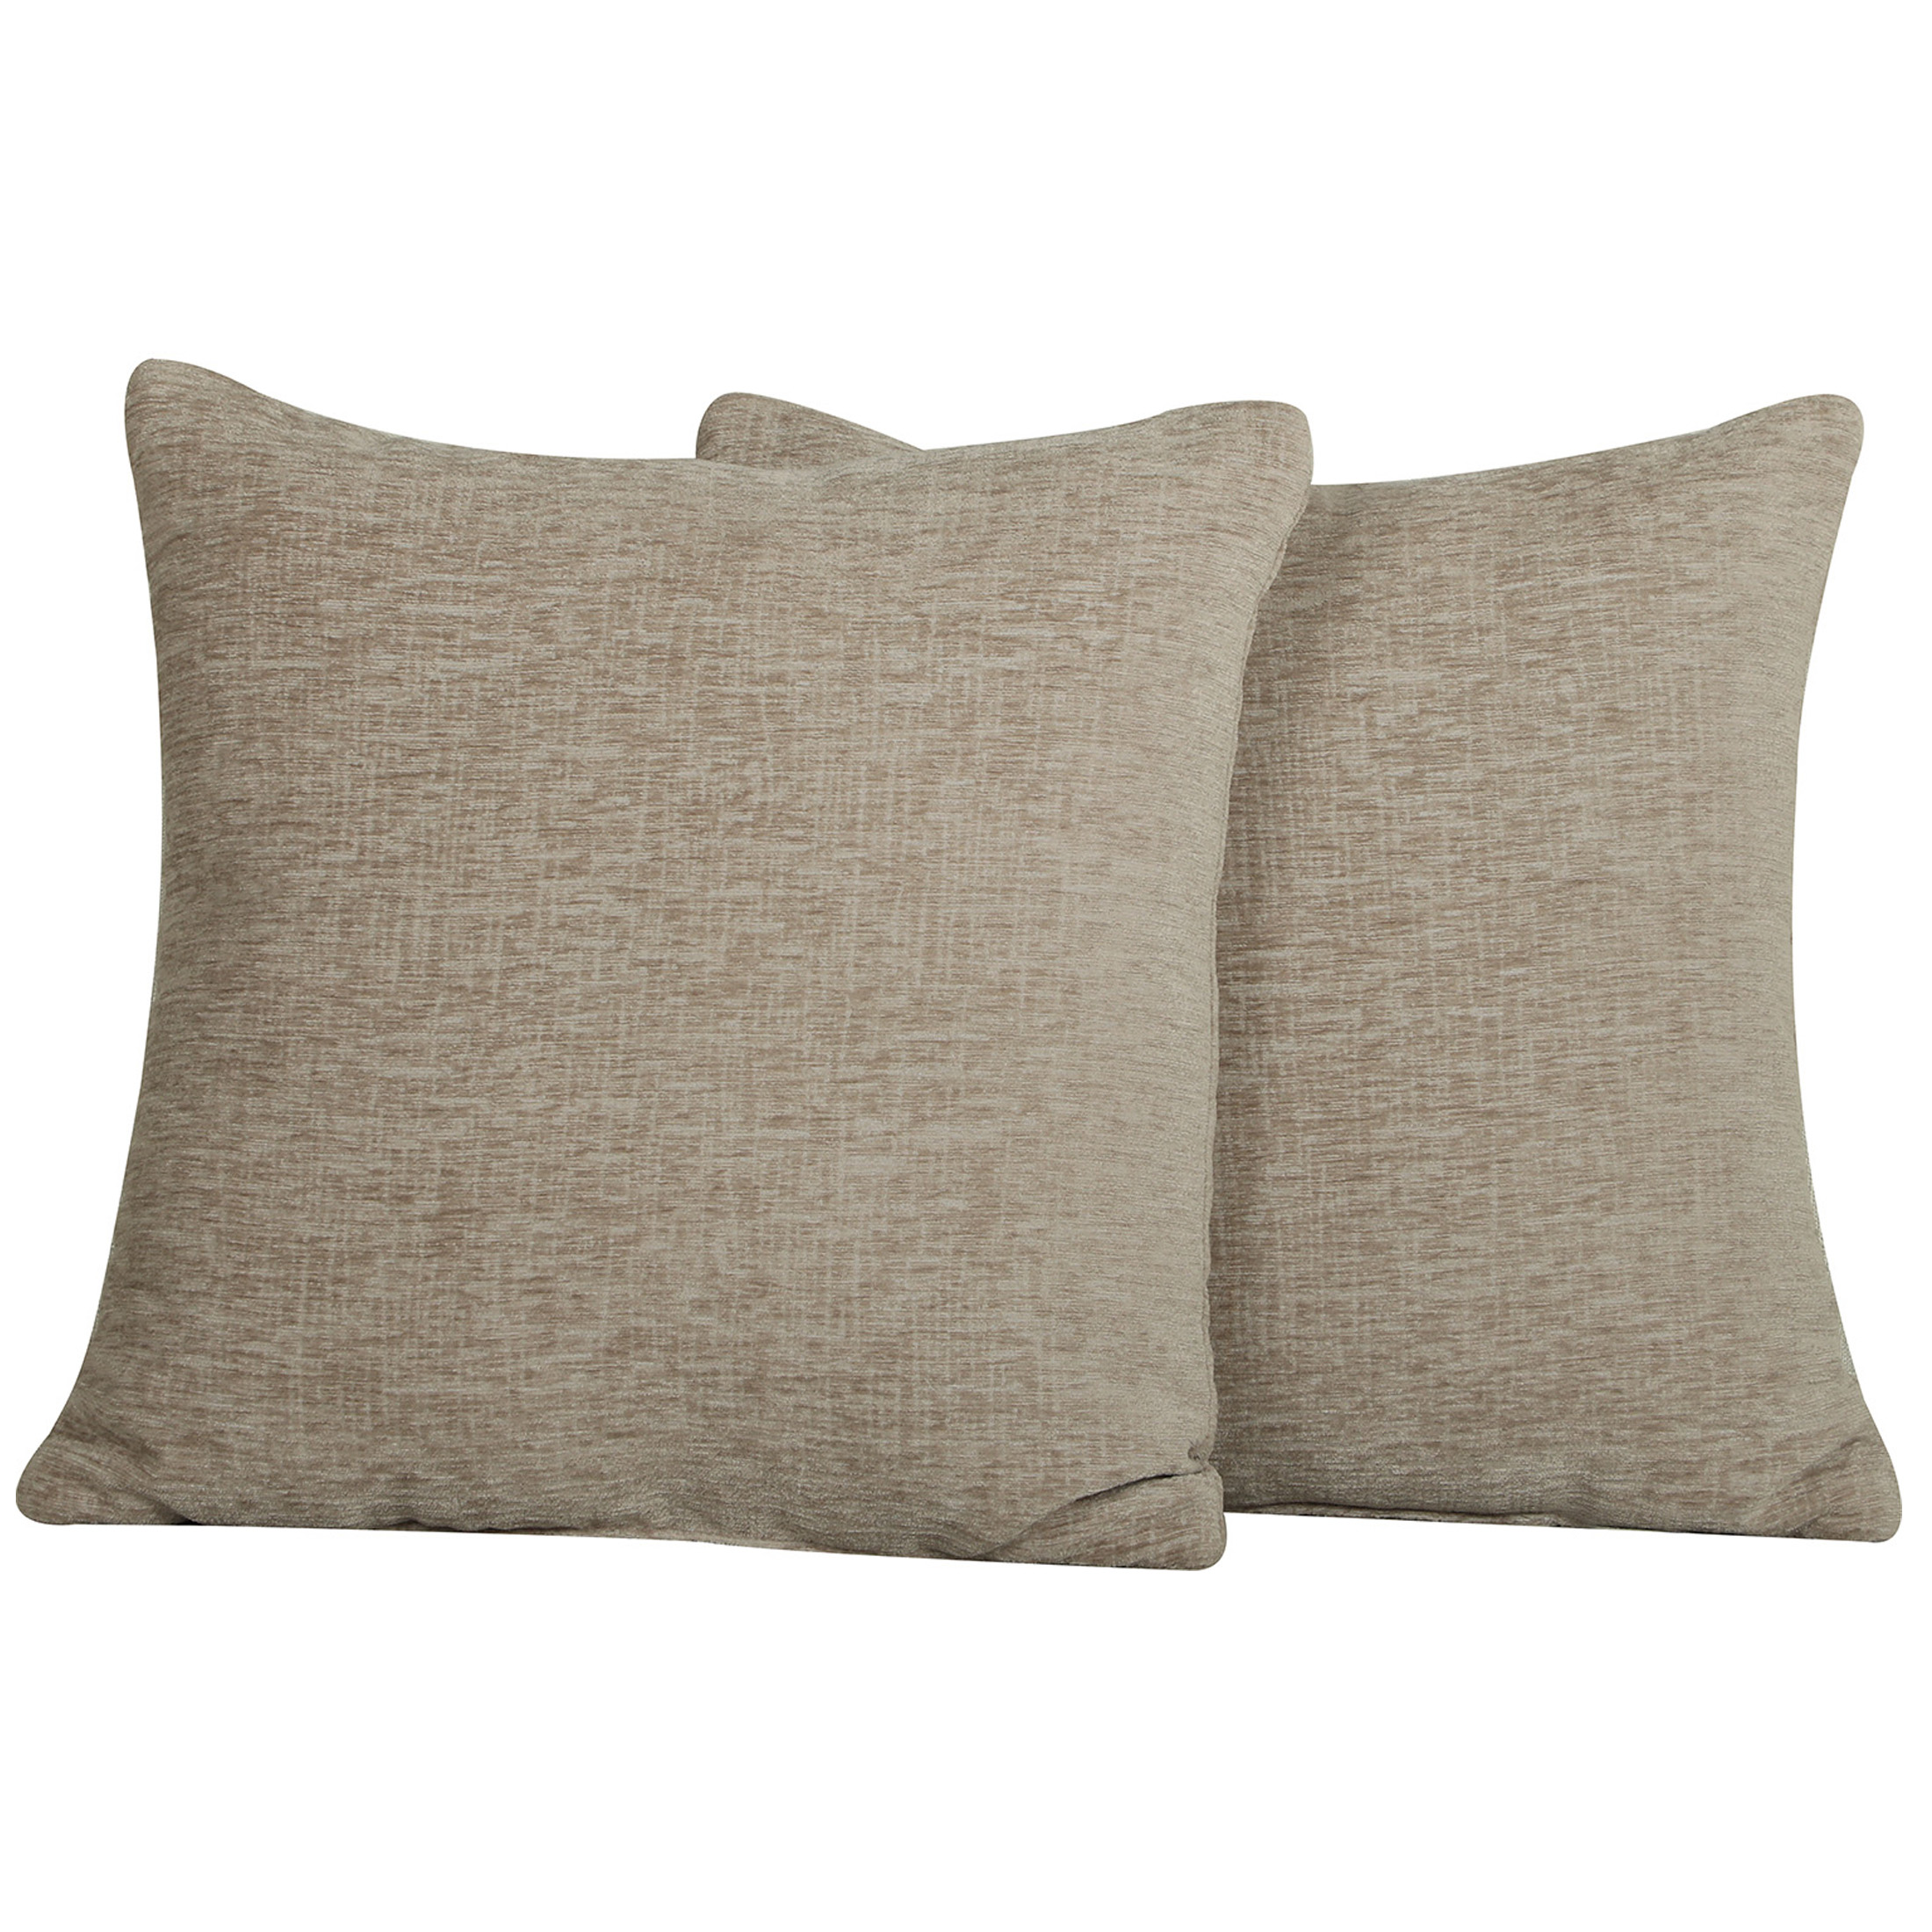 Mainstays Chenille Beige Square Pillow 18''x18'', 2 Pack - image 1 of 5